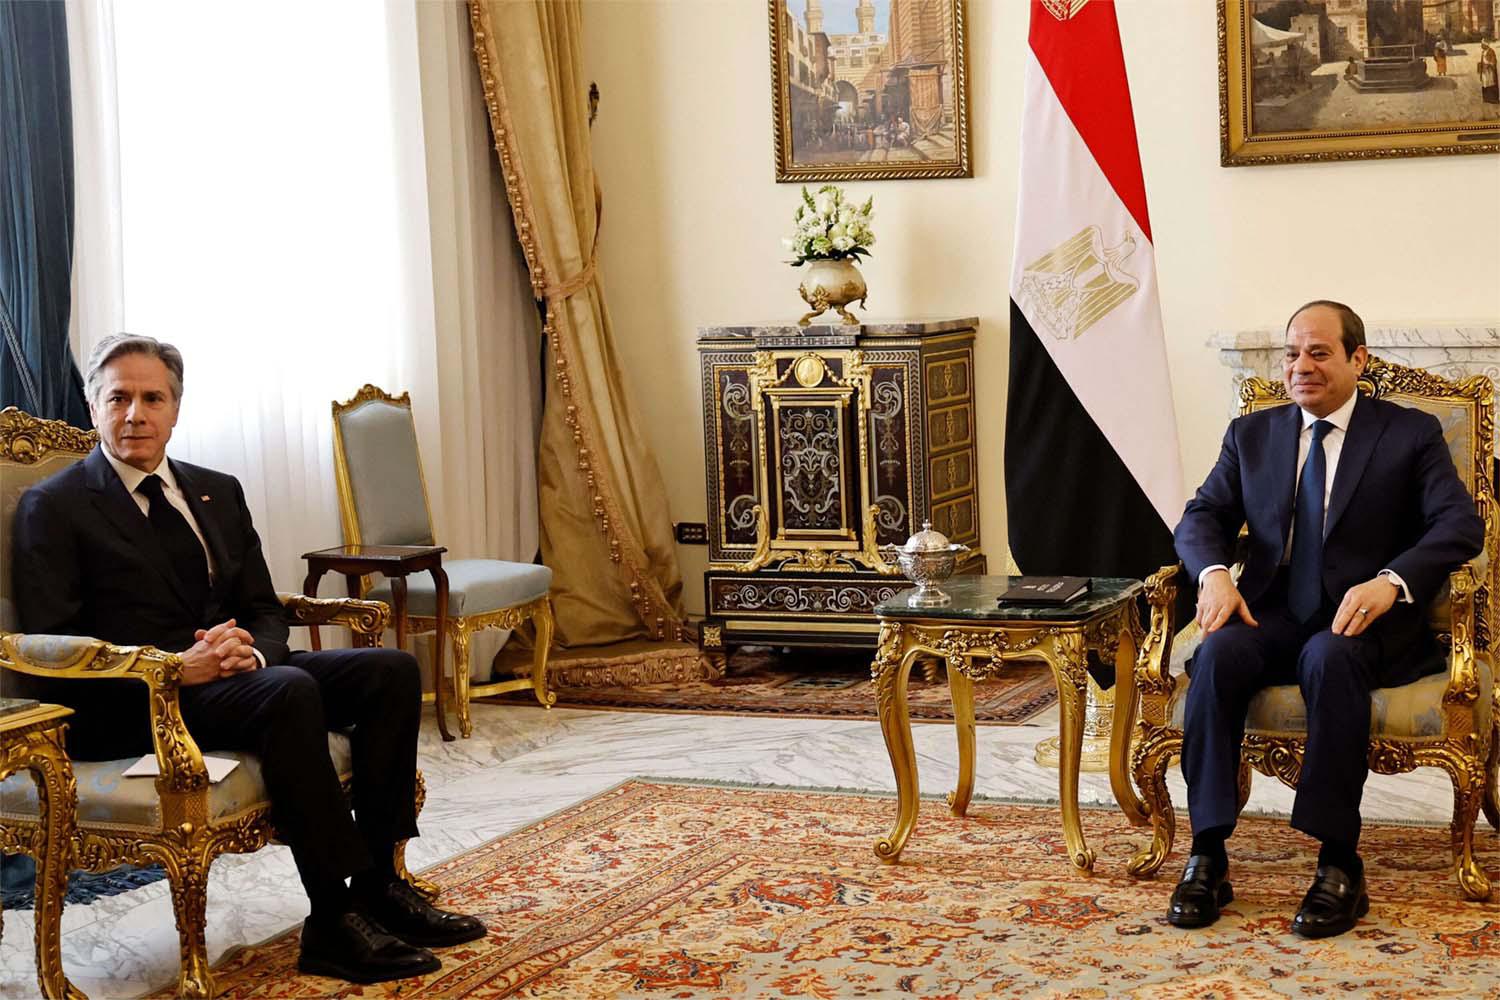 Blinken and Sisi also discussed regional issues